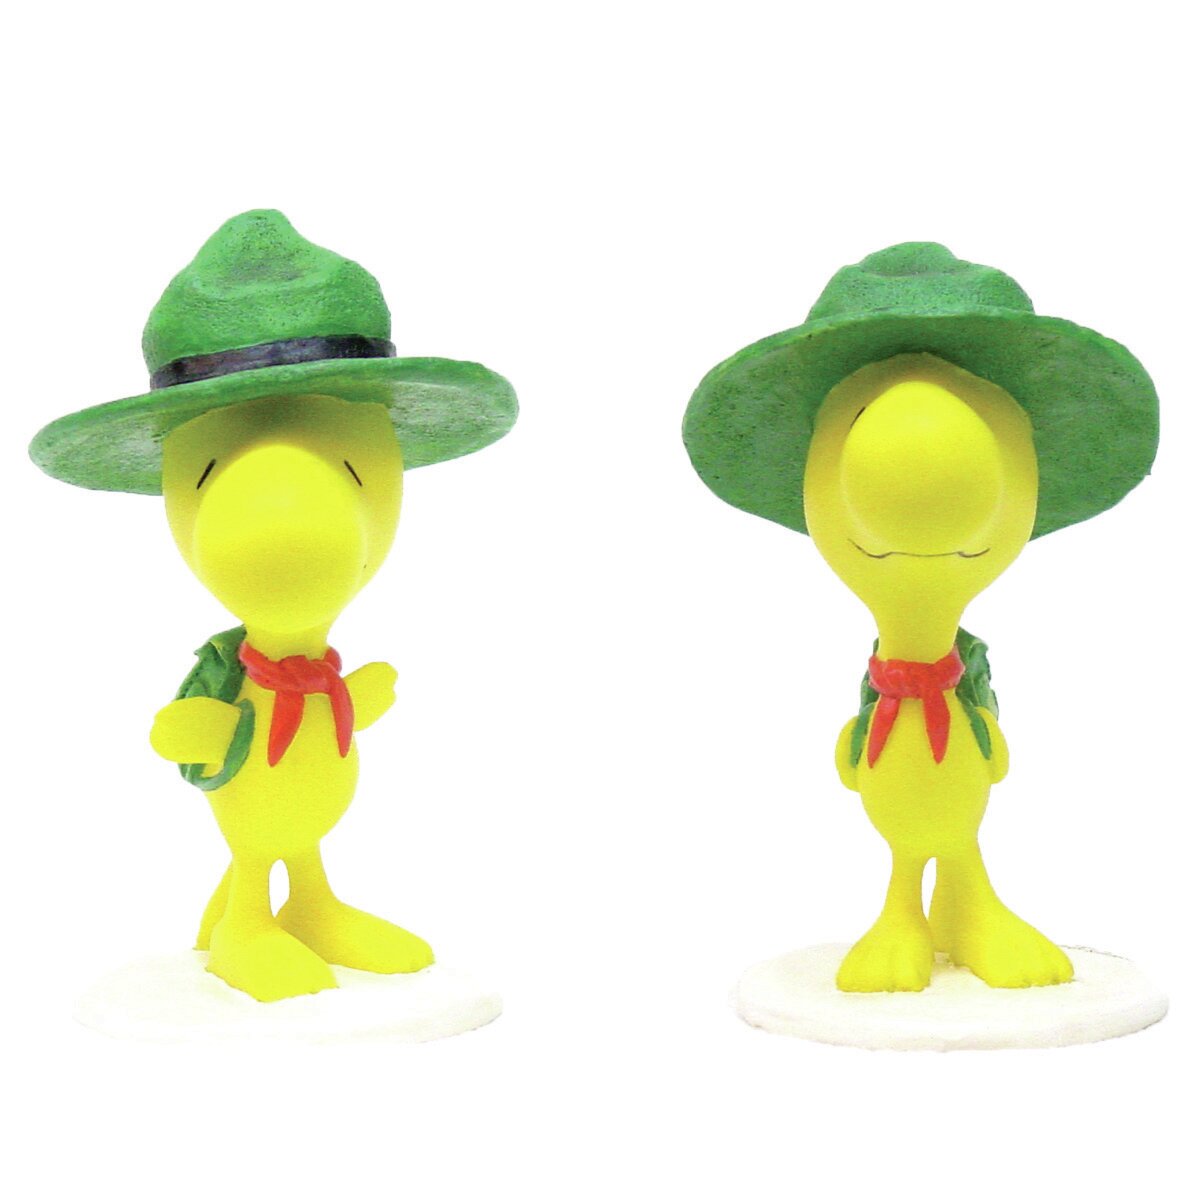 Gnomes Of Toad Hollow Woodstock Snoopy Peanuts 2 Piece Statue Set Reviews Wayfair